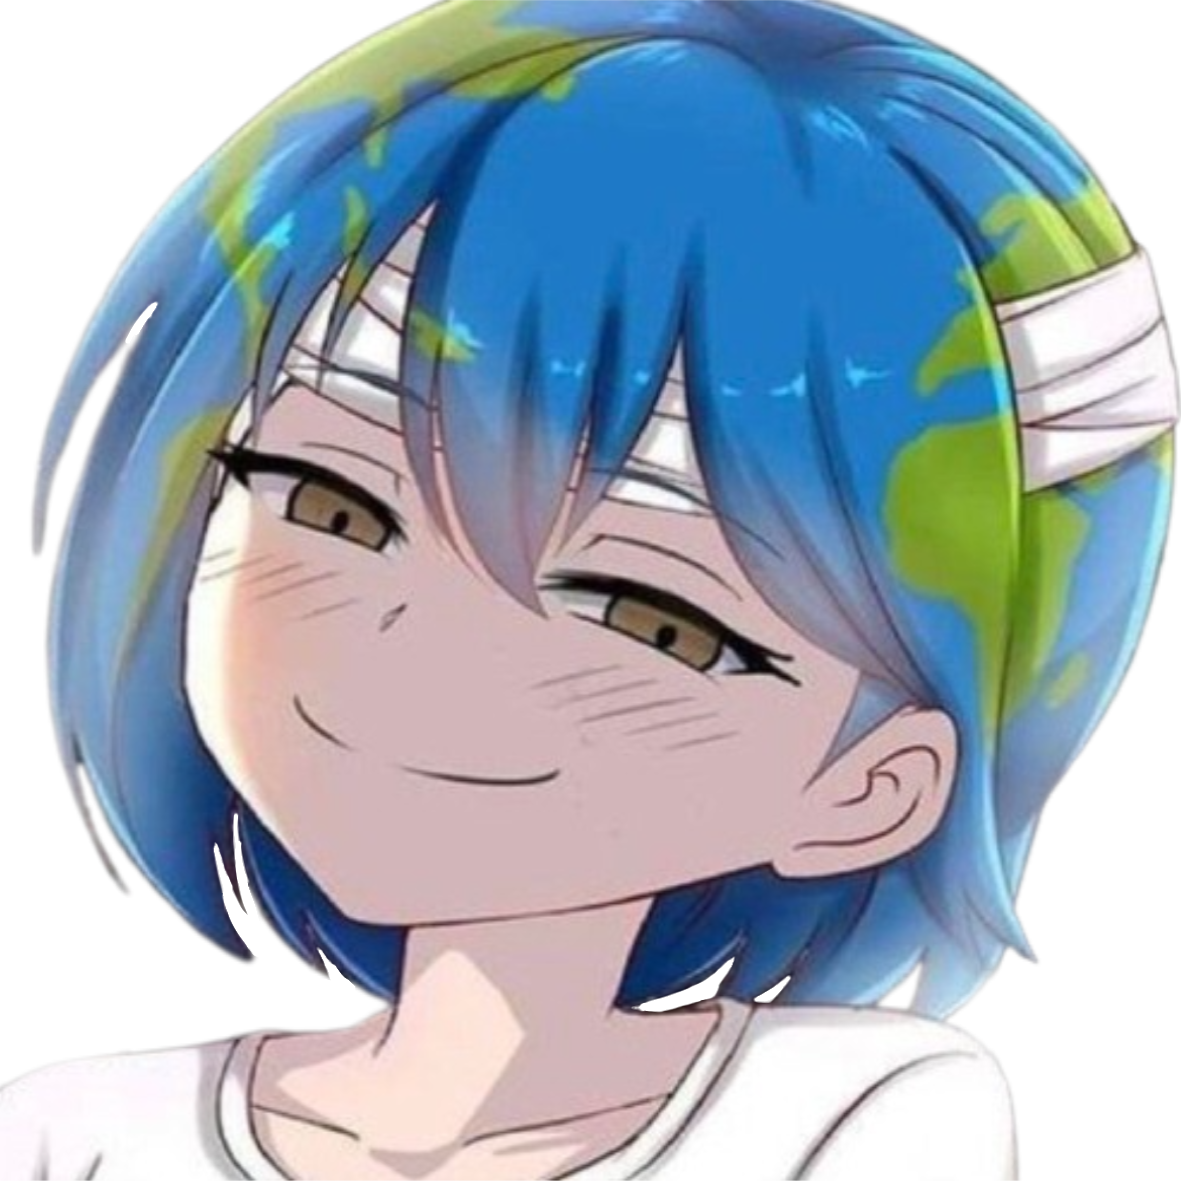 Earth-chan phases - Album on Imgur | Earth-chan, Cute drawings, Anime funny